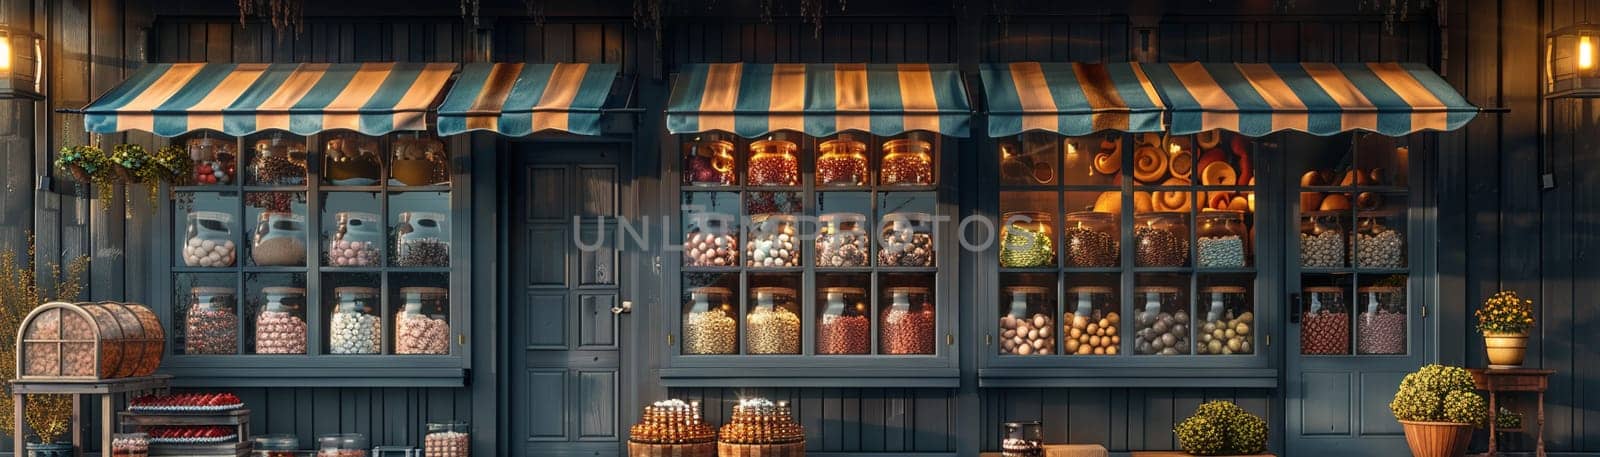 Old-fashioned candy shop with jars of sweets and a striped awning3D render.